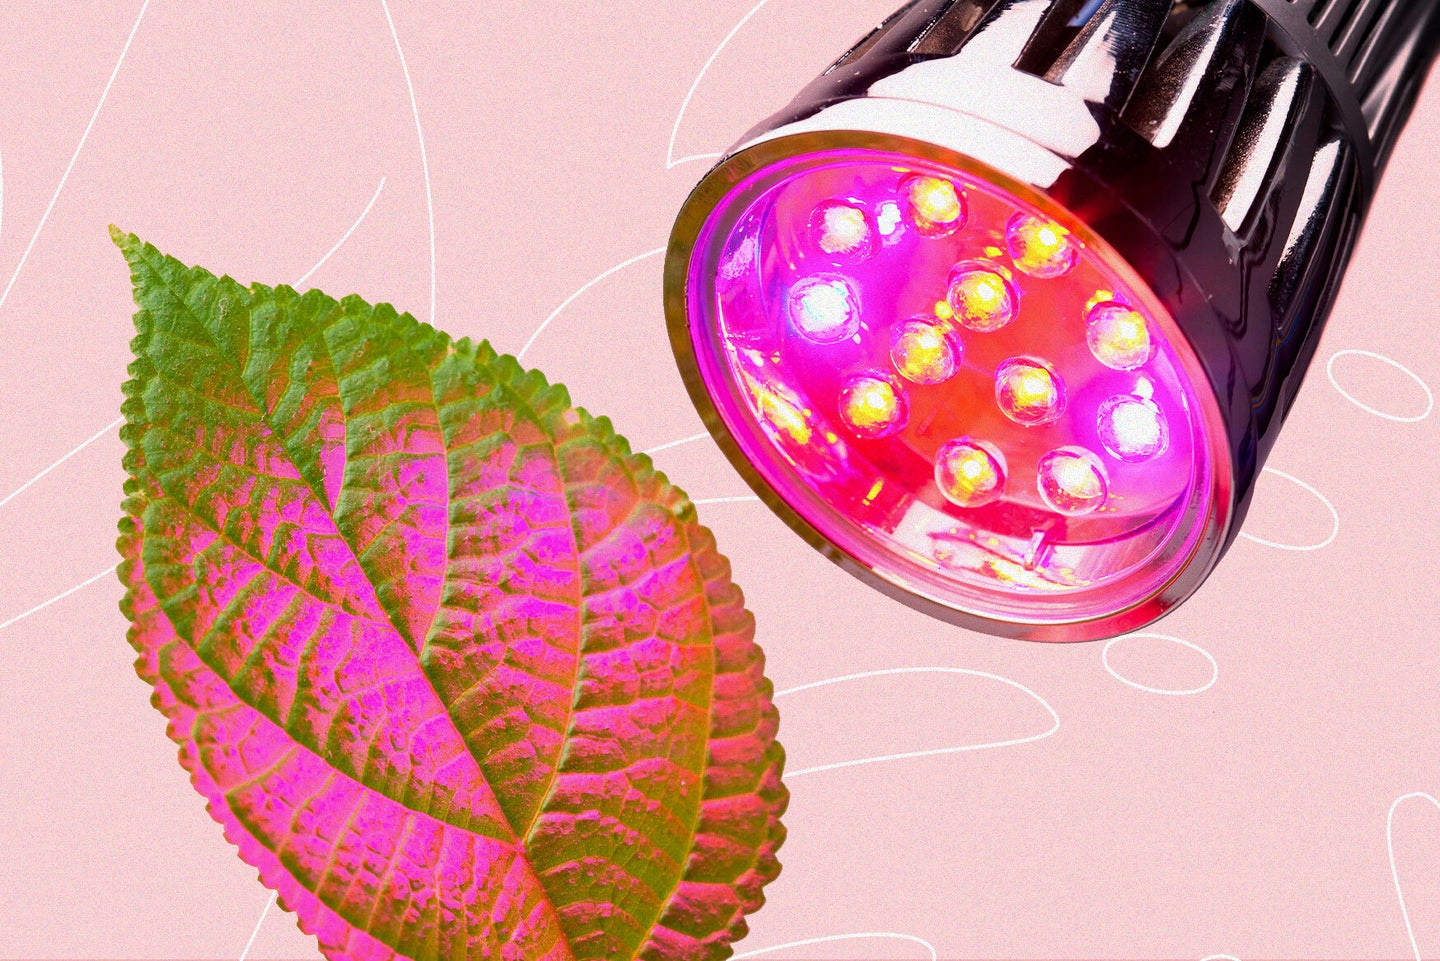 An LED grow light illuminating a plant's leaf and turning it a shade of purple.